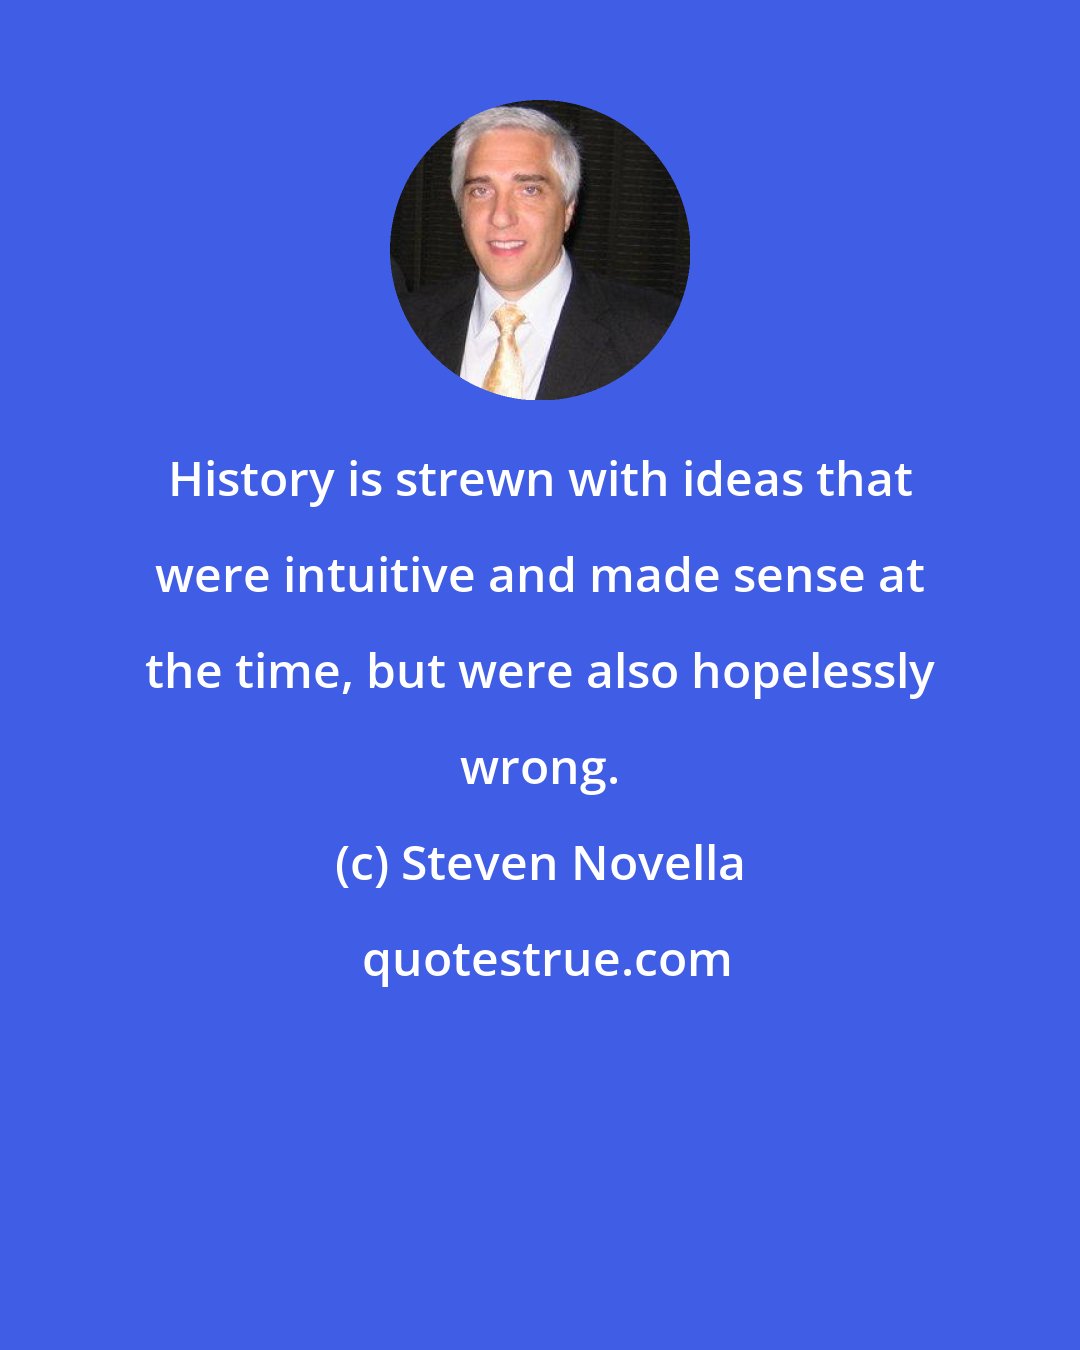 Steven Novella: History is strewn with ideas that were intuitive and made sense at the time, but were also hopelessly wrong.